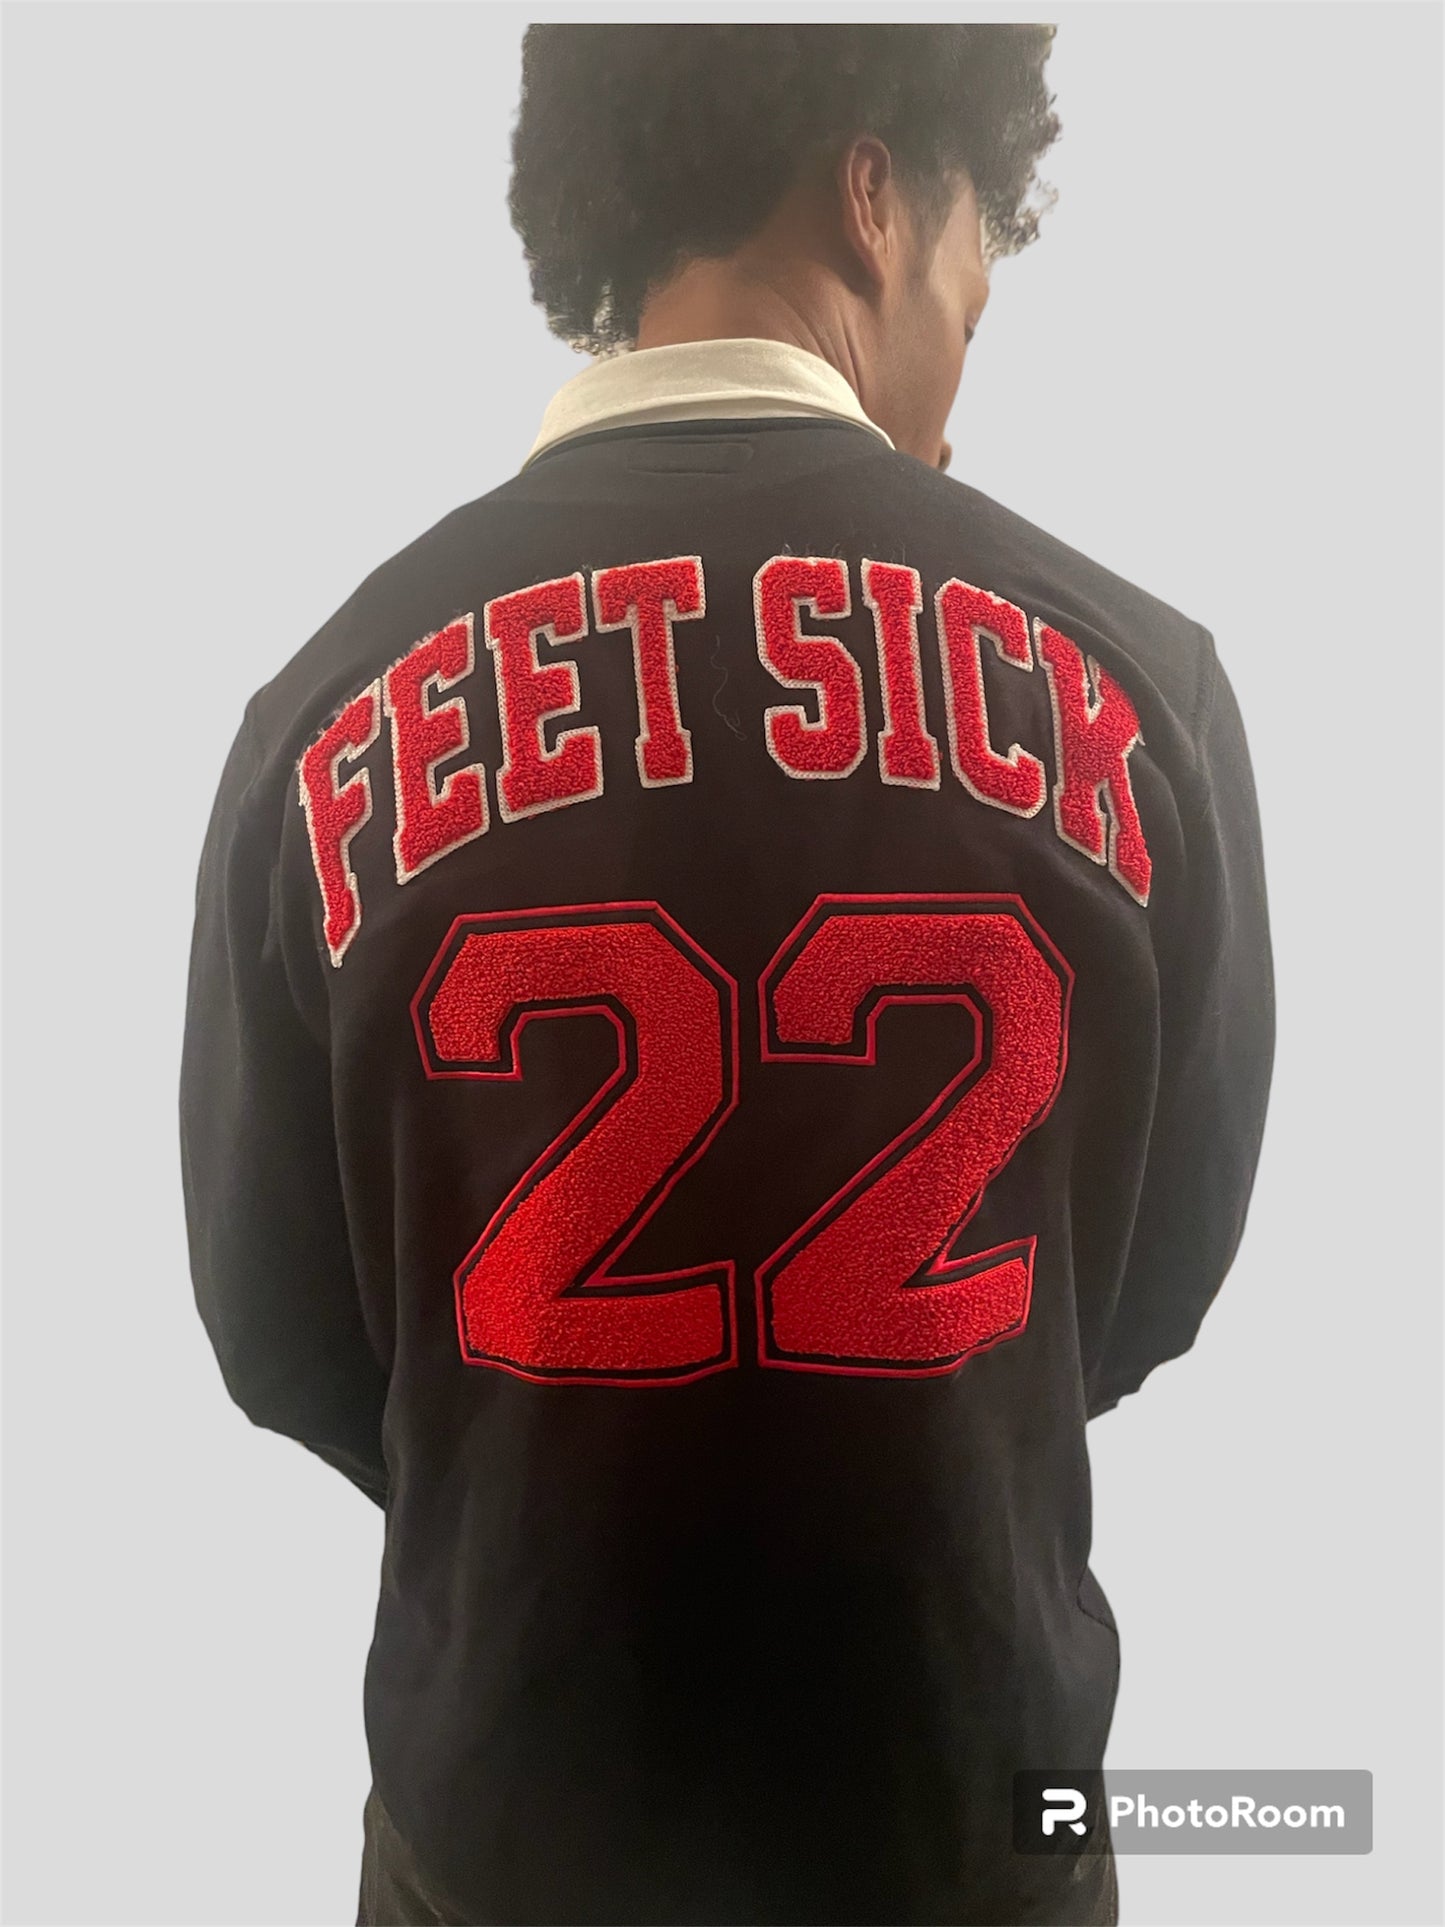 Feet Sick Black and White Rugby Shirt